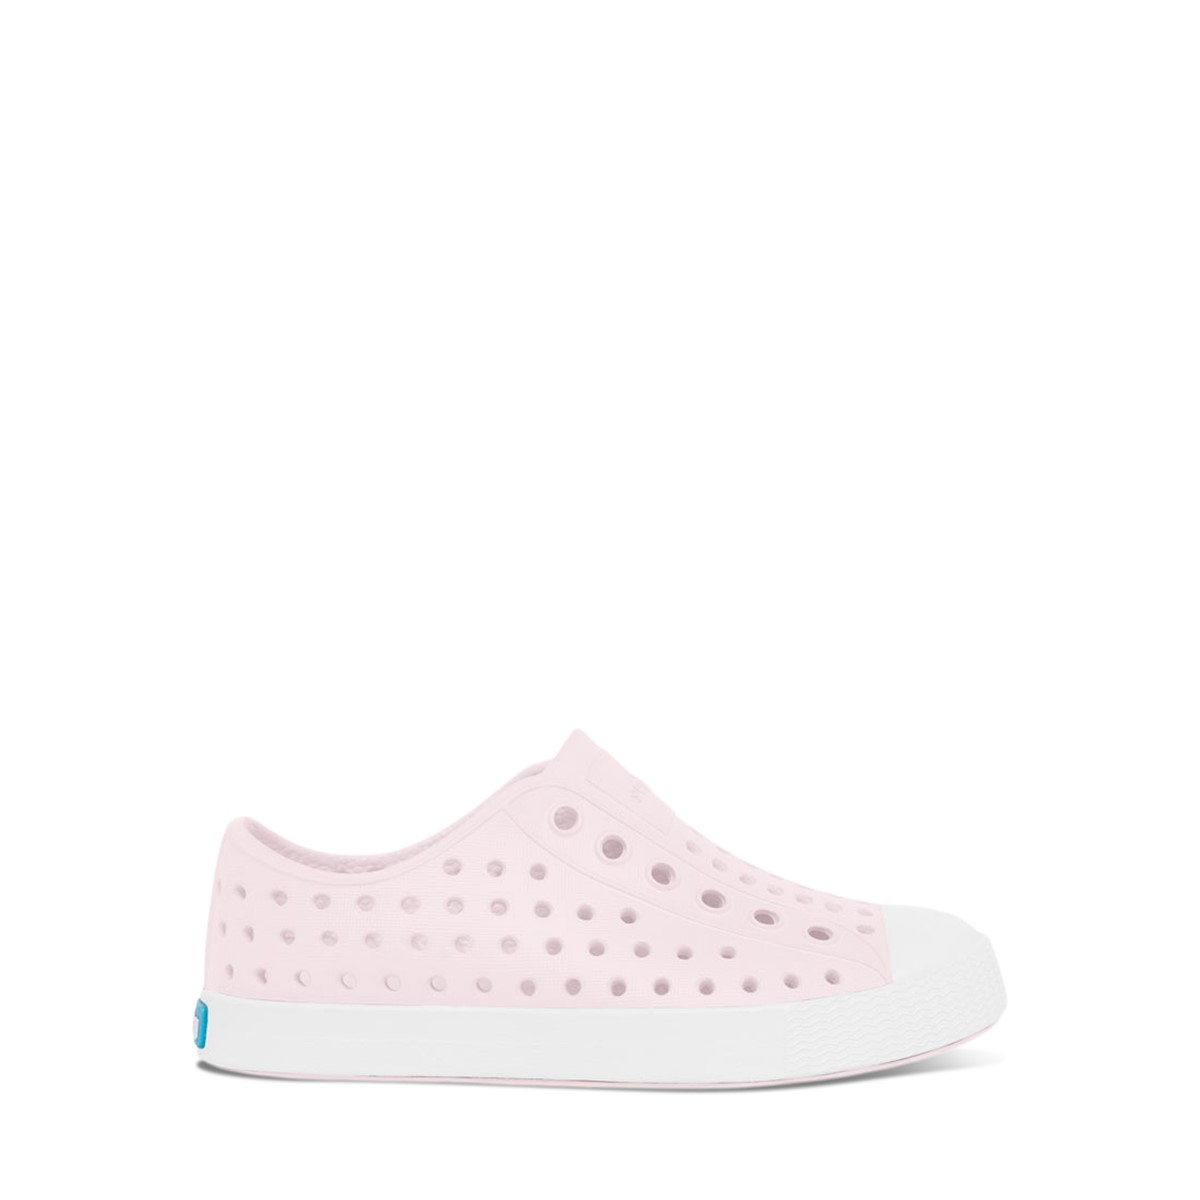 Big Kids' Jefferson Slip-On Shoes in Pink/White